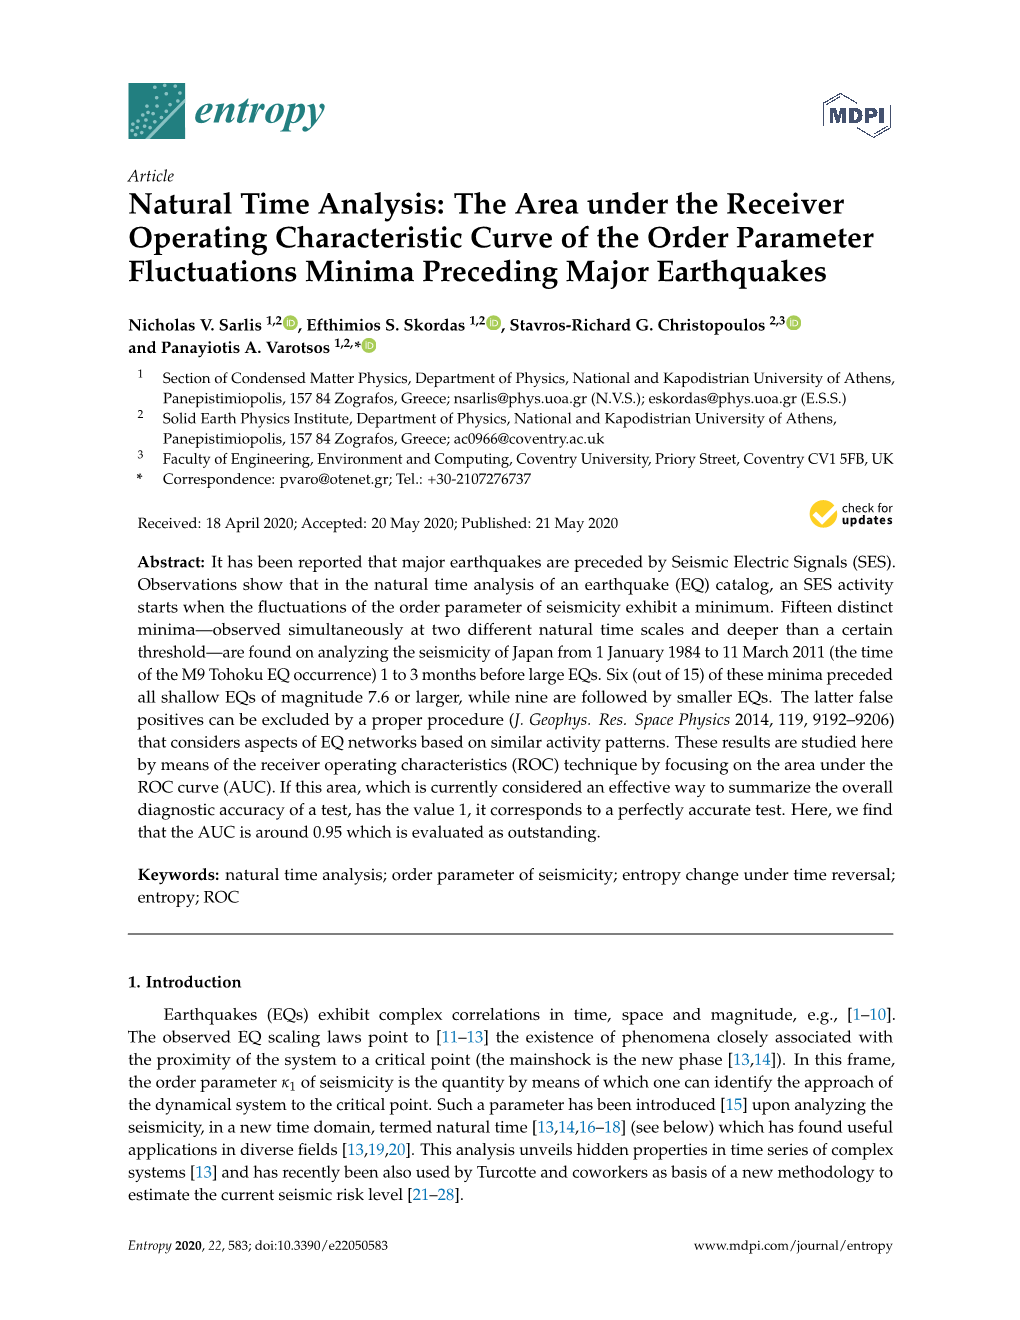 Natural Time Analysis: the Area Under the Receiver Operating Characteristic Curve of the Order Parameter Fluctuations Minima Preceding Major Earthquakes